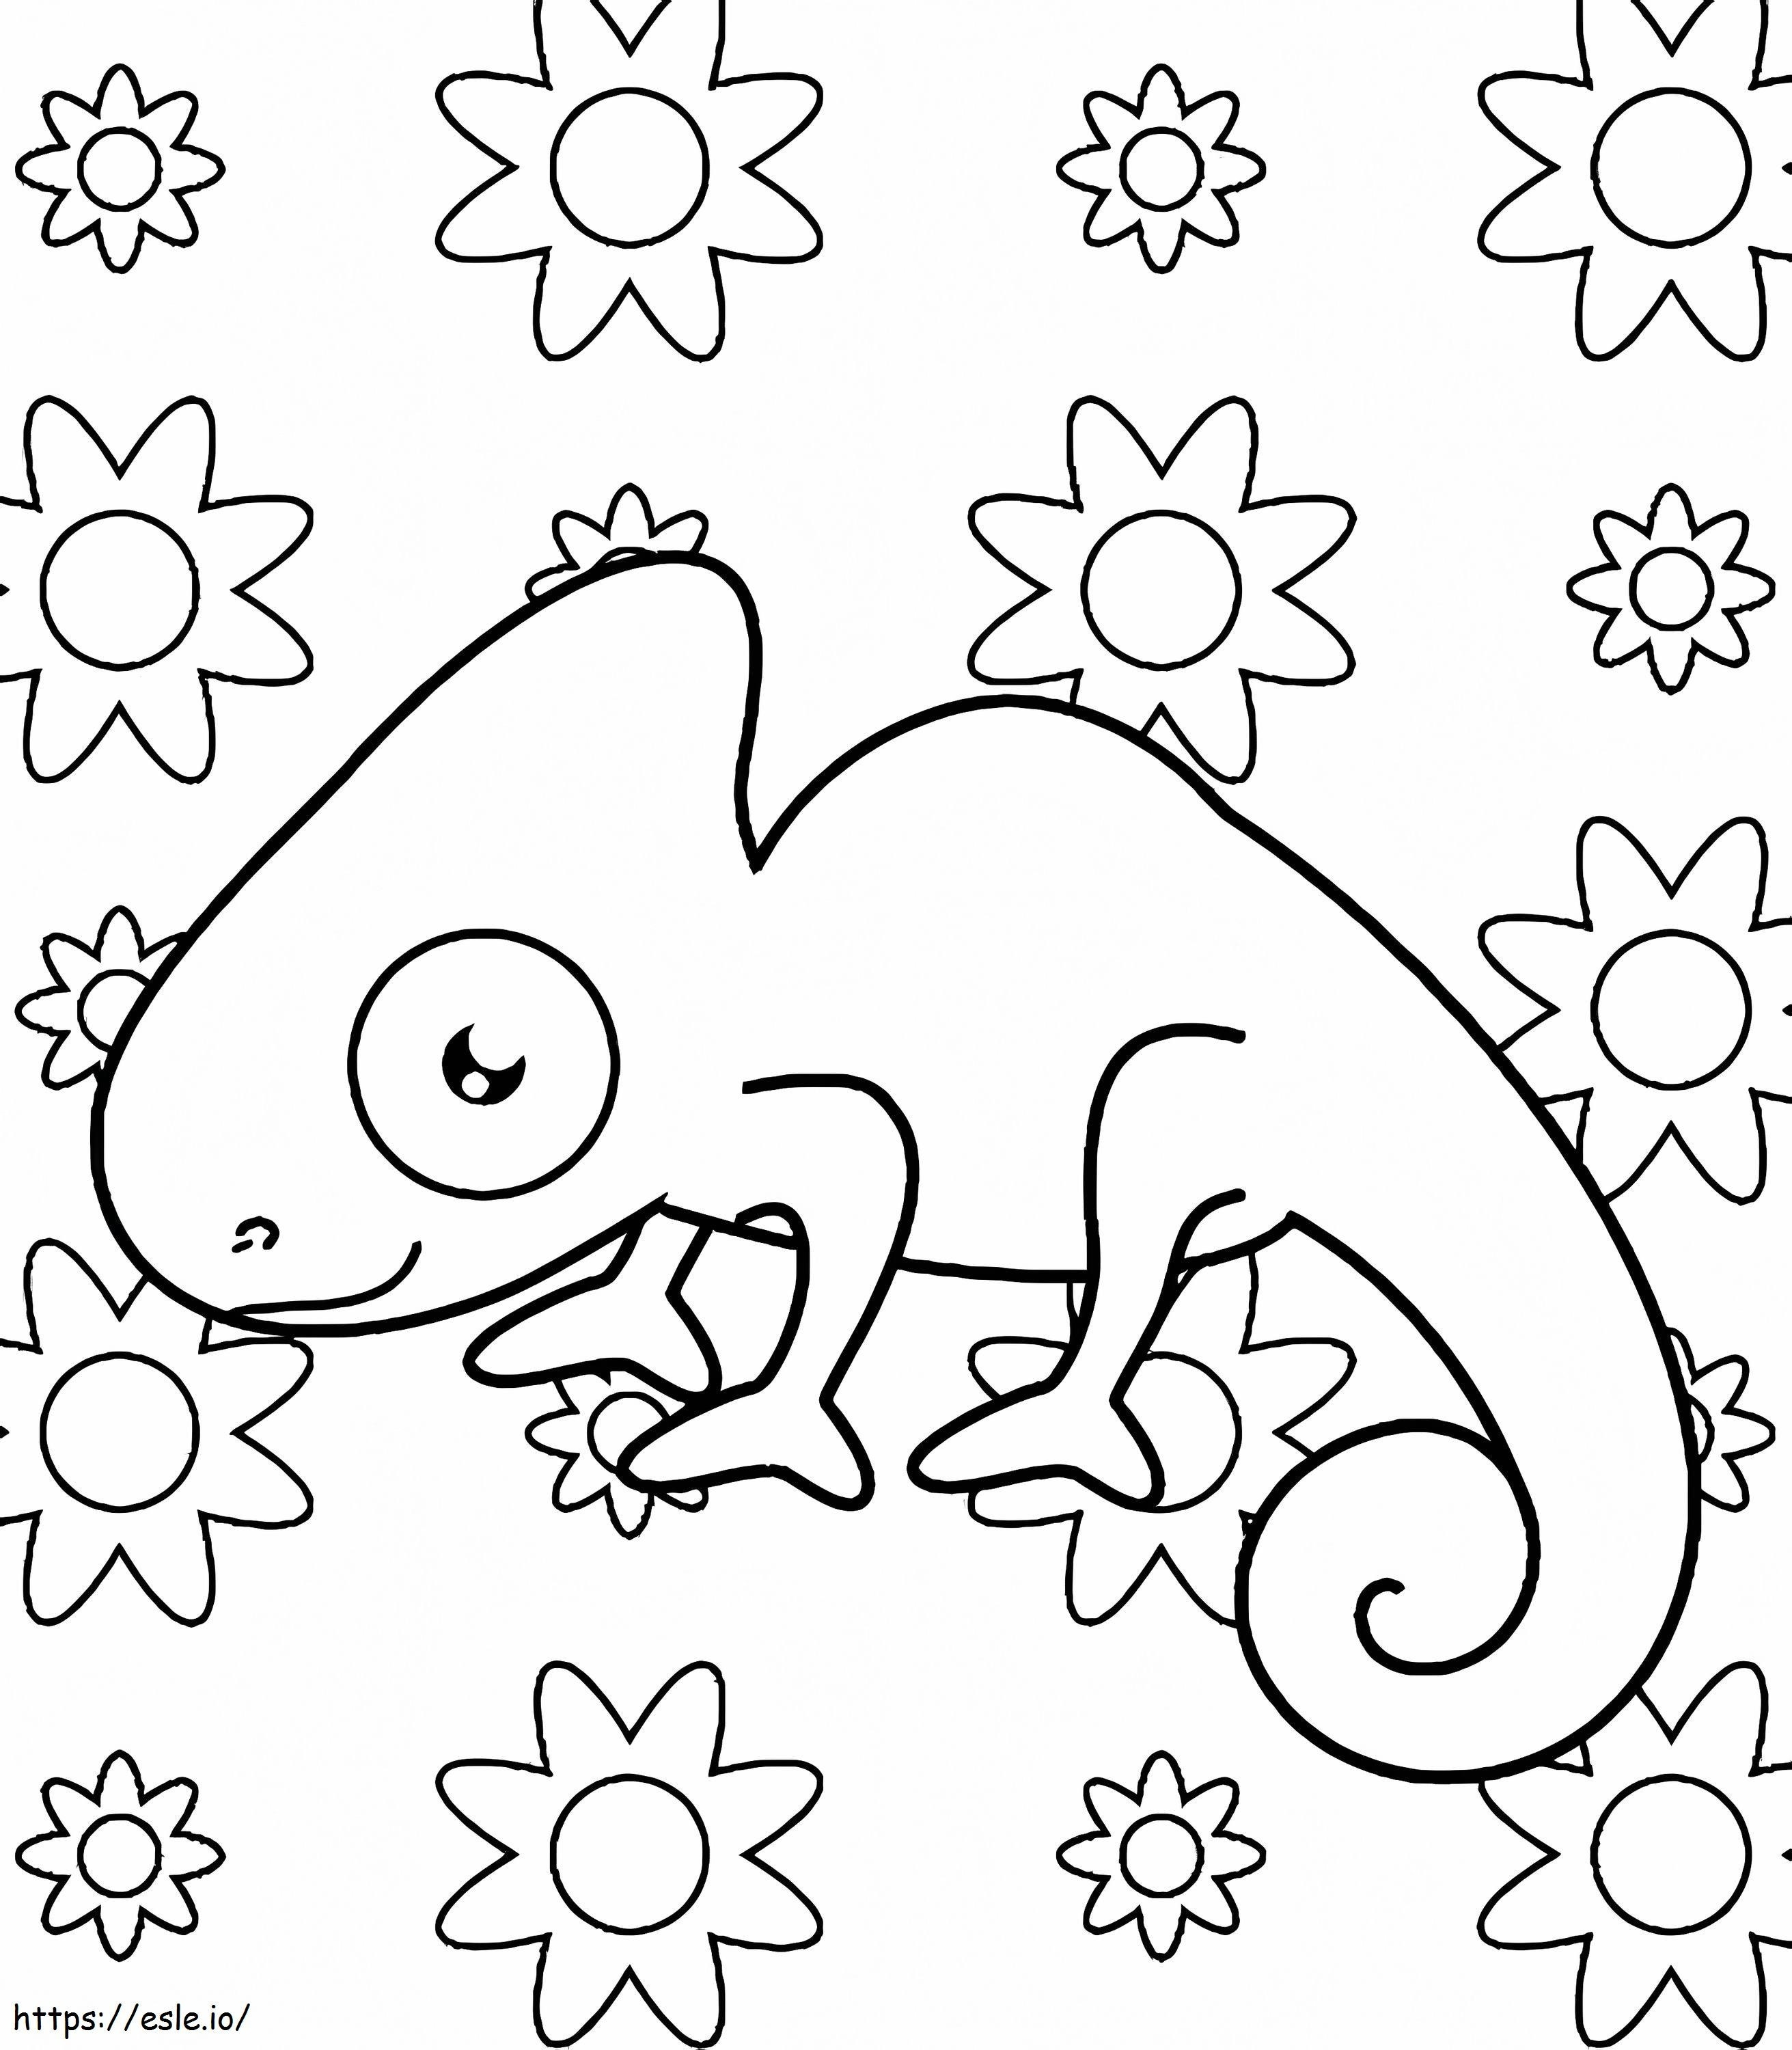 Cartoon Chameleon coloring page